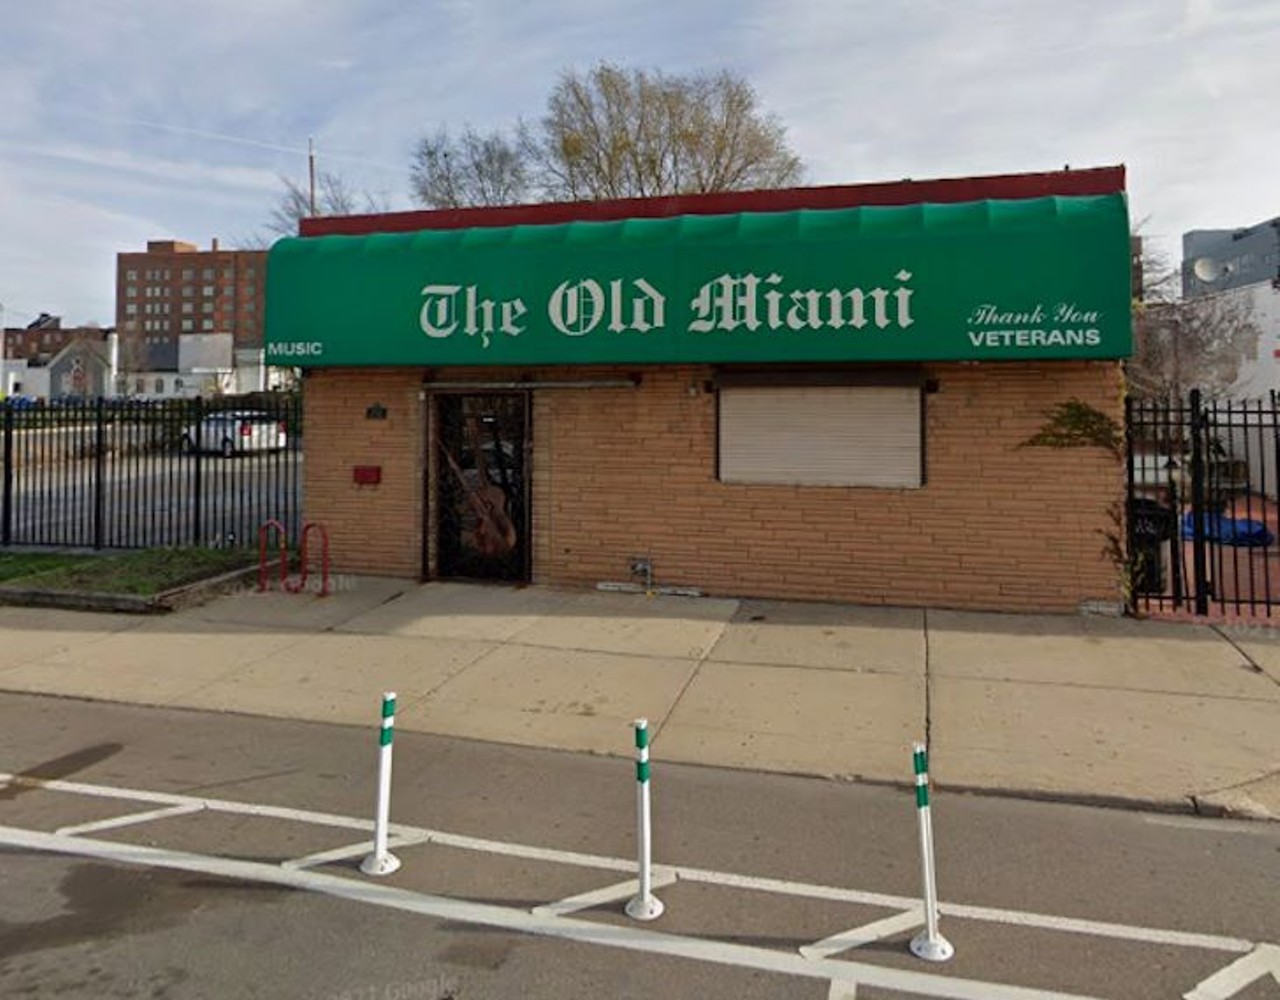 The Old Miami
3930 Cass Ave., Detroit; 313-831-3830
This Cass Corridor bar first opened in 1980. Not only is it a popular neighborhood spot for a drink, it&#146;s also a destination for local music performances. 
Photo via Google Maps